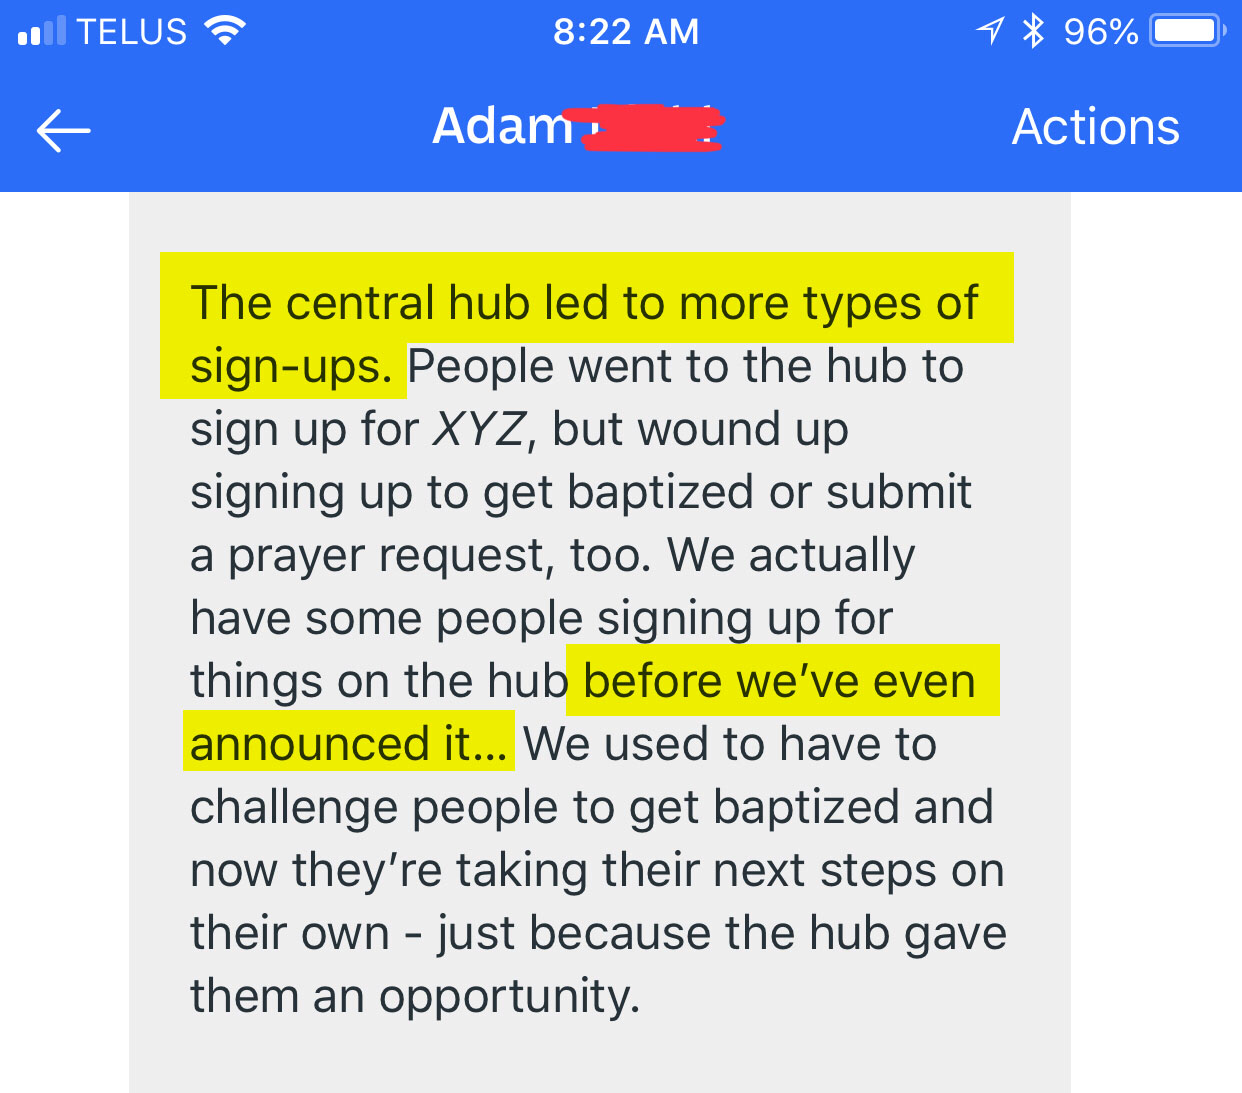 The central hub led to more types of signups. We actually have some people signing up for things on the hub before we've even announced it...